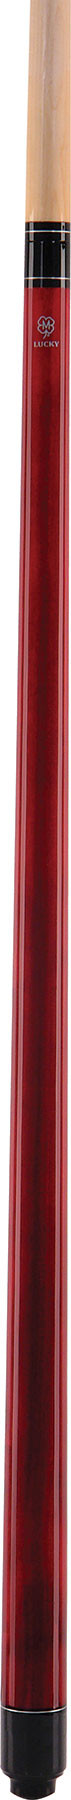 McDermott Lucky Pool Cue, L5, Red